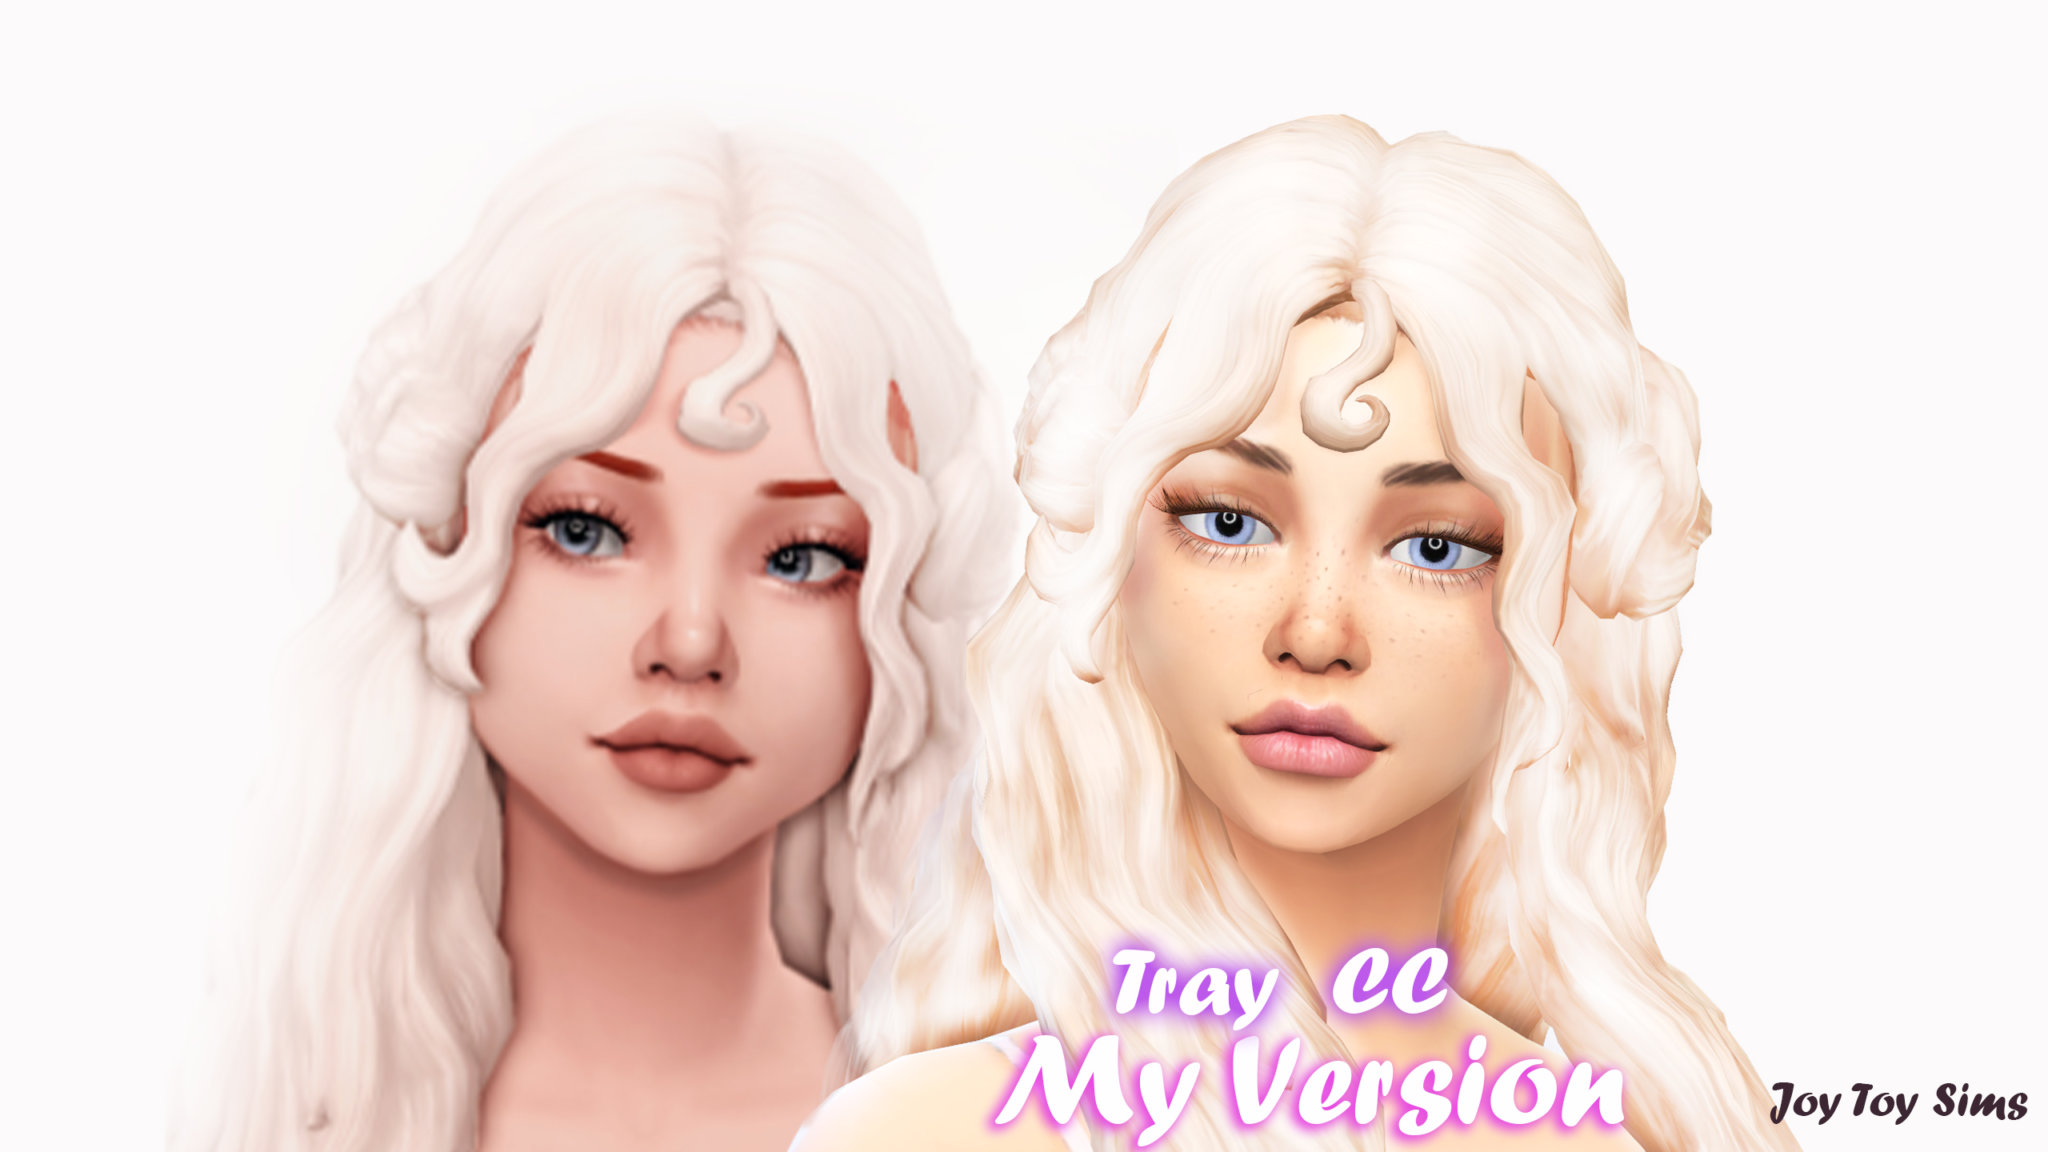 sims 4 cc sweet smooth skin non default